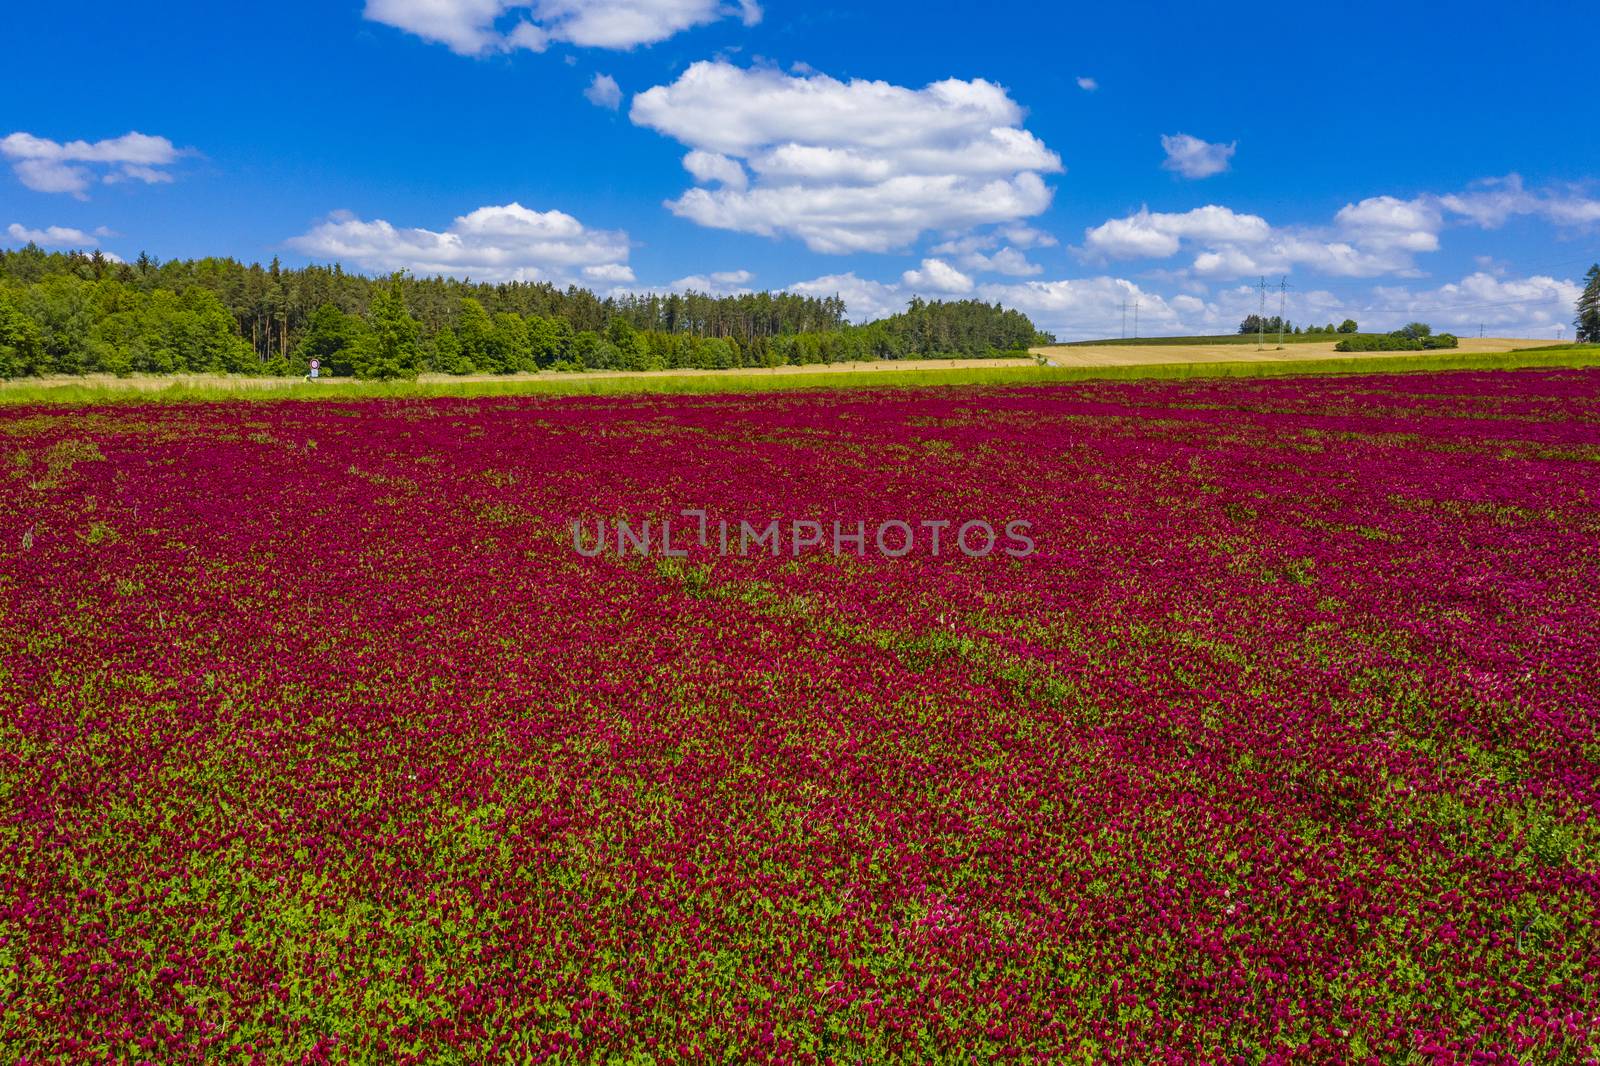 Red blooming crimson clover field (Trifolium incarnatum) with forest in the back